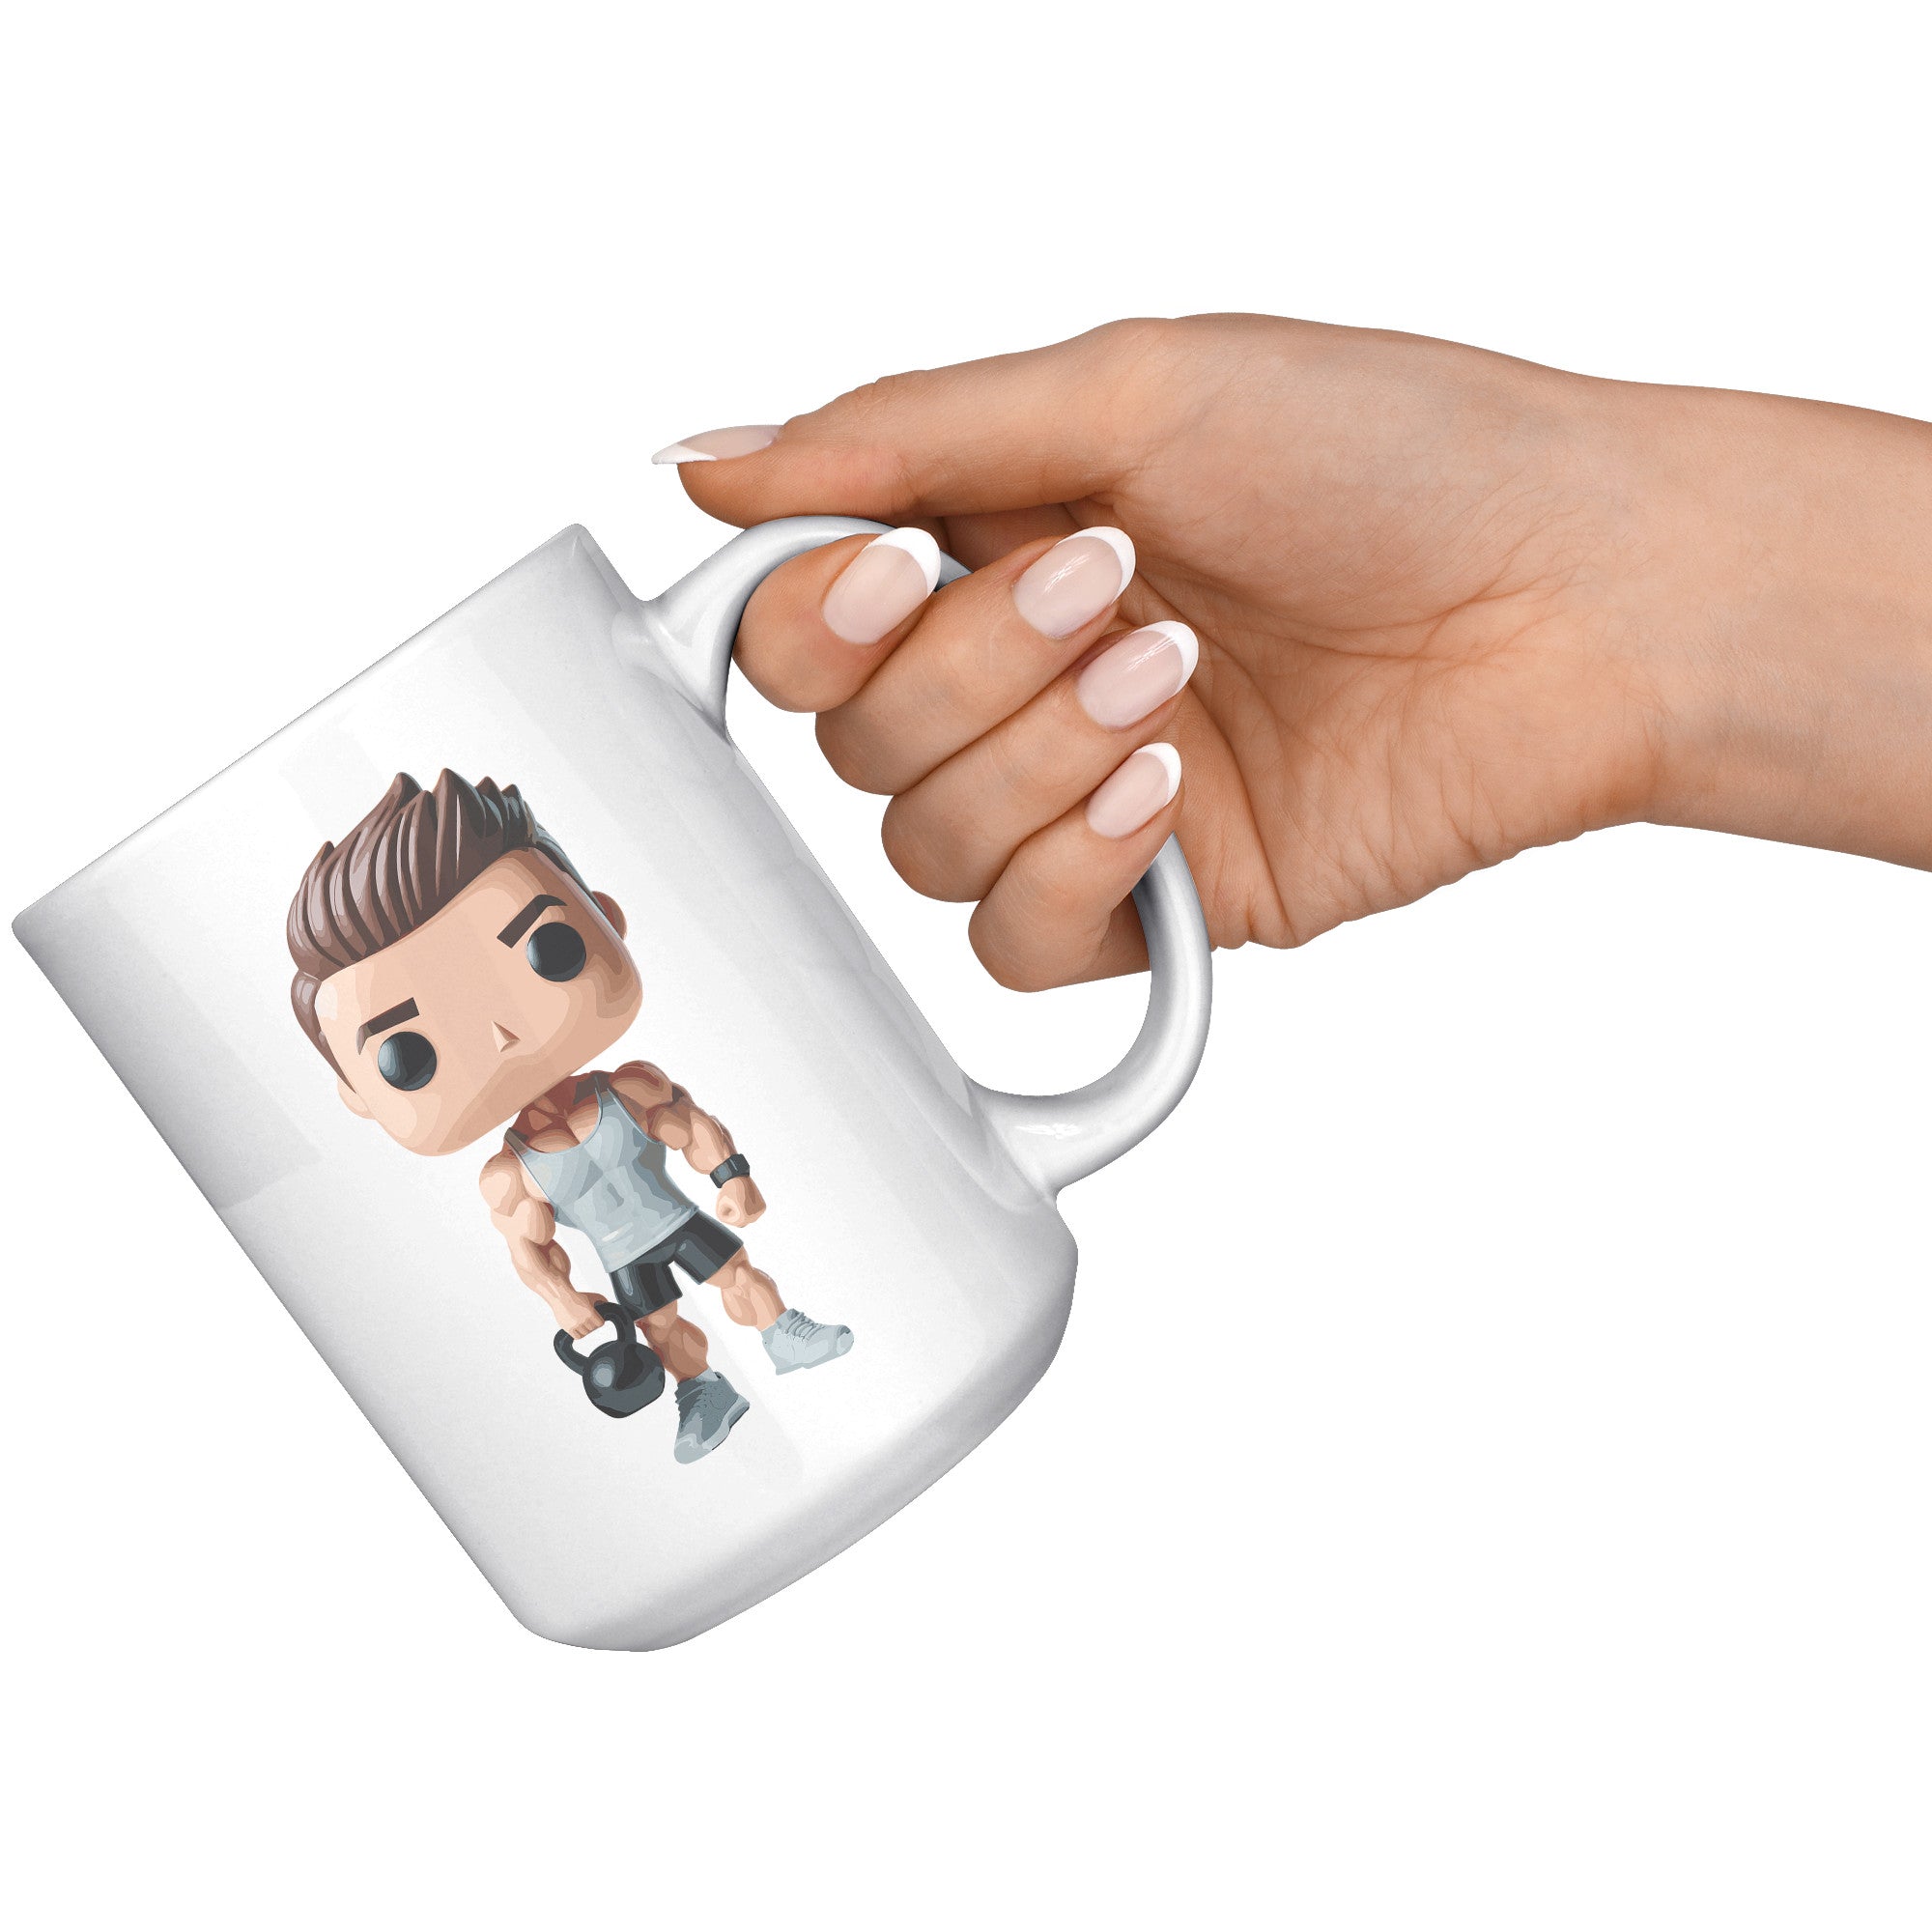 "CrossFit Funko Pop Style Mug - Male Fitness Enthusiast Coffee Cup - Unique Gift for Gym Buffs - Fun Workout-Inspired Drinkware" - B1